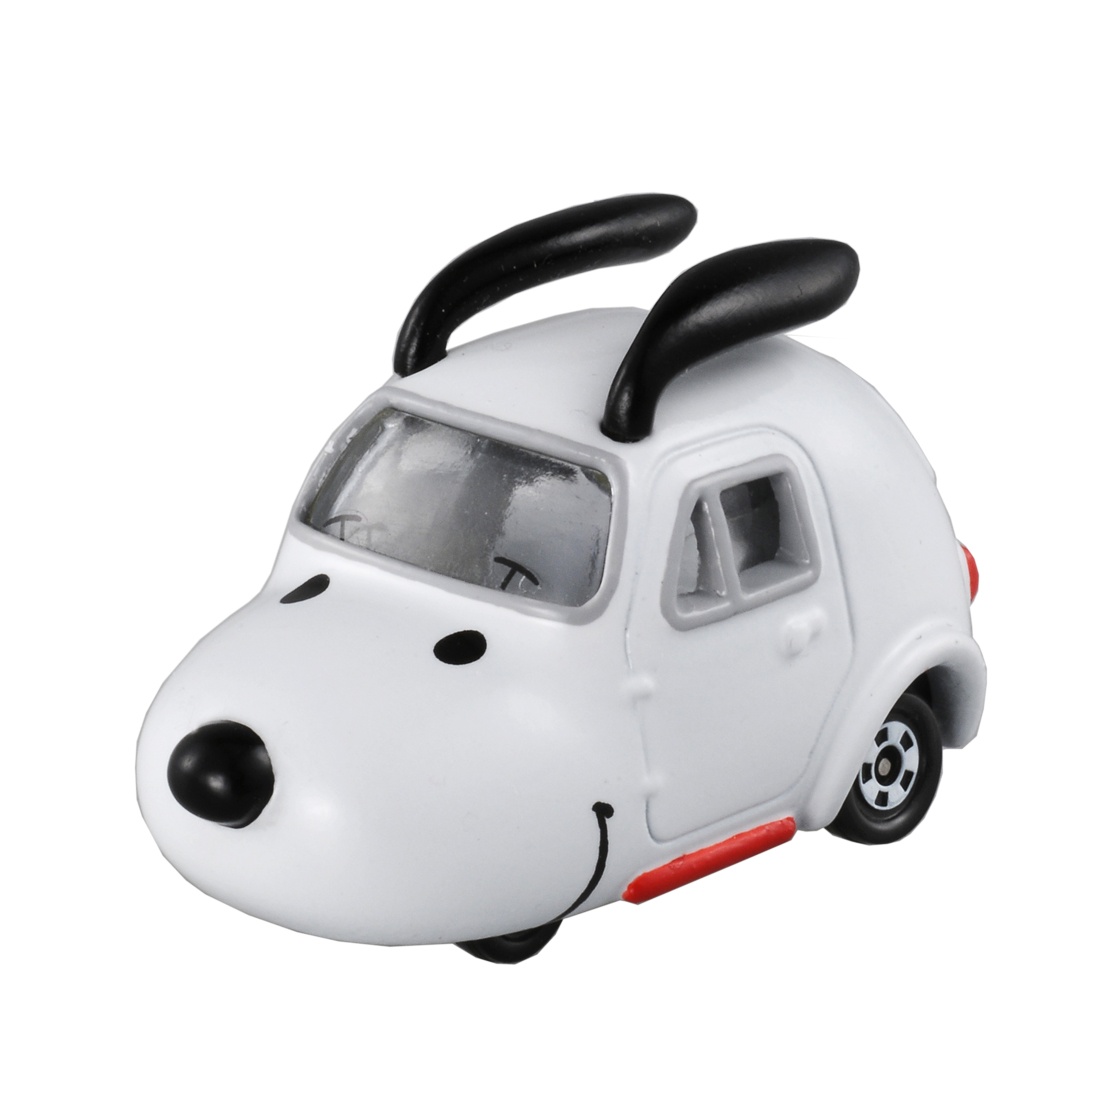 TAKARA TOMY Tomica Dream Snoopy car From Japan   No.153